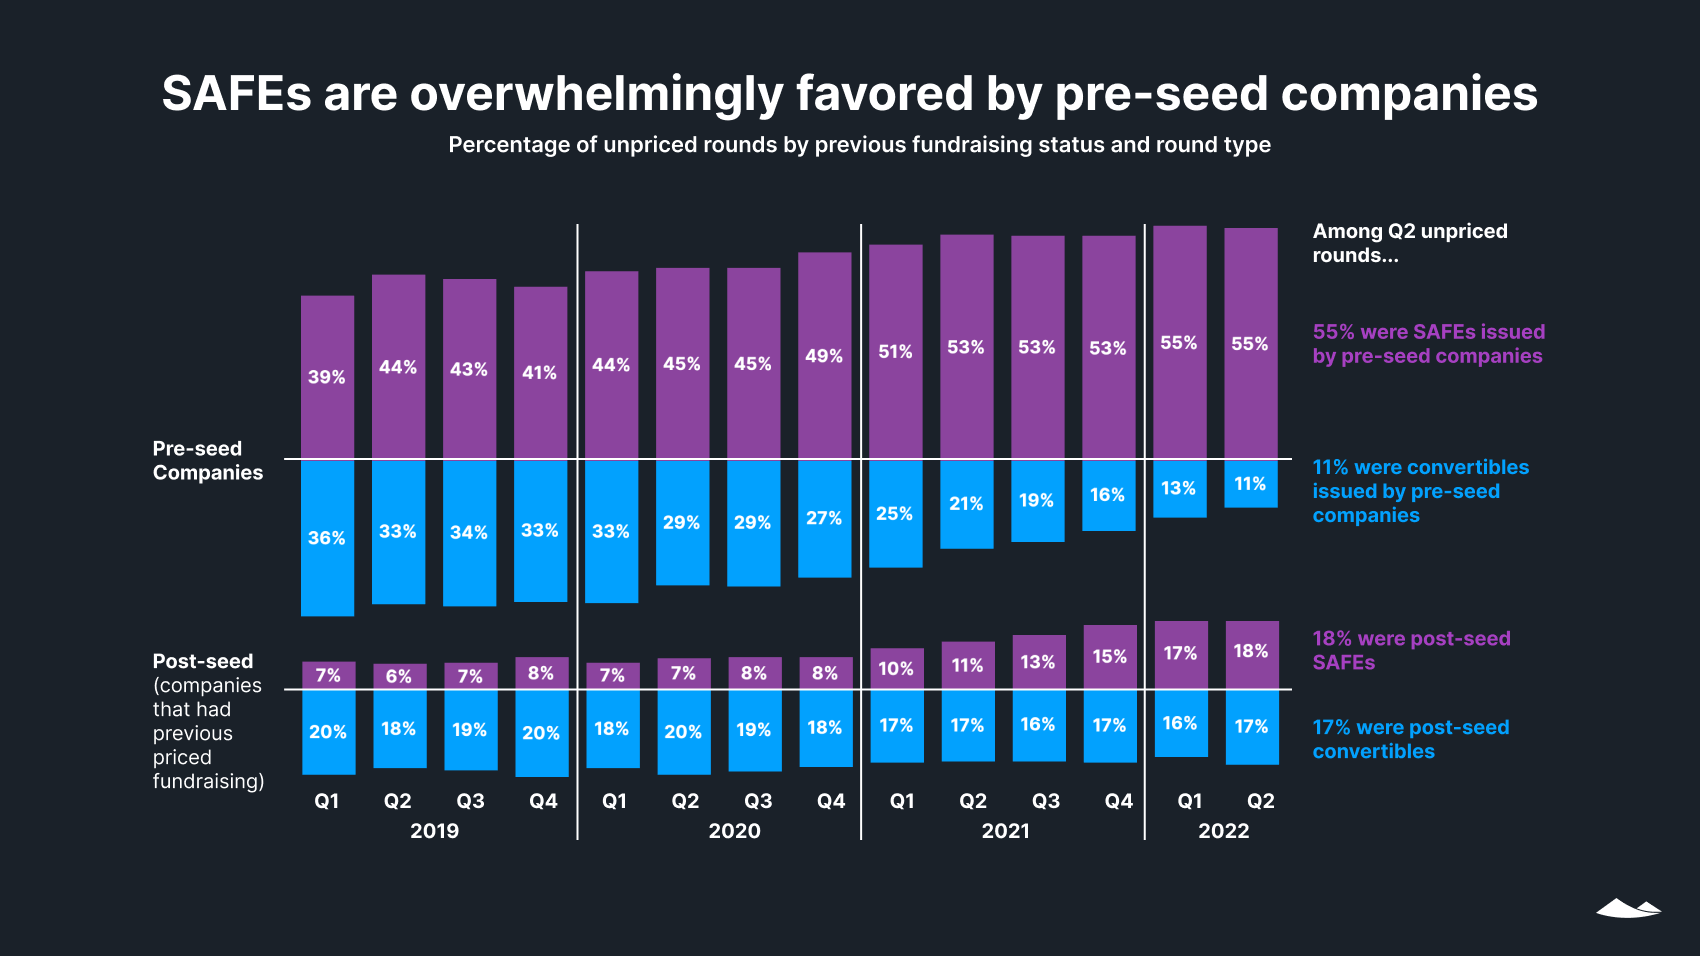 SAFEs favored by pre-seed companies: % of unpriced rounds by previous fundraising status and round type. Sliding bar charts